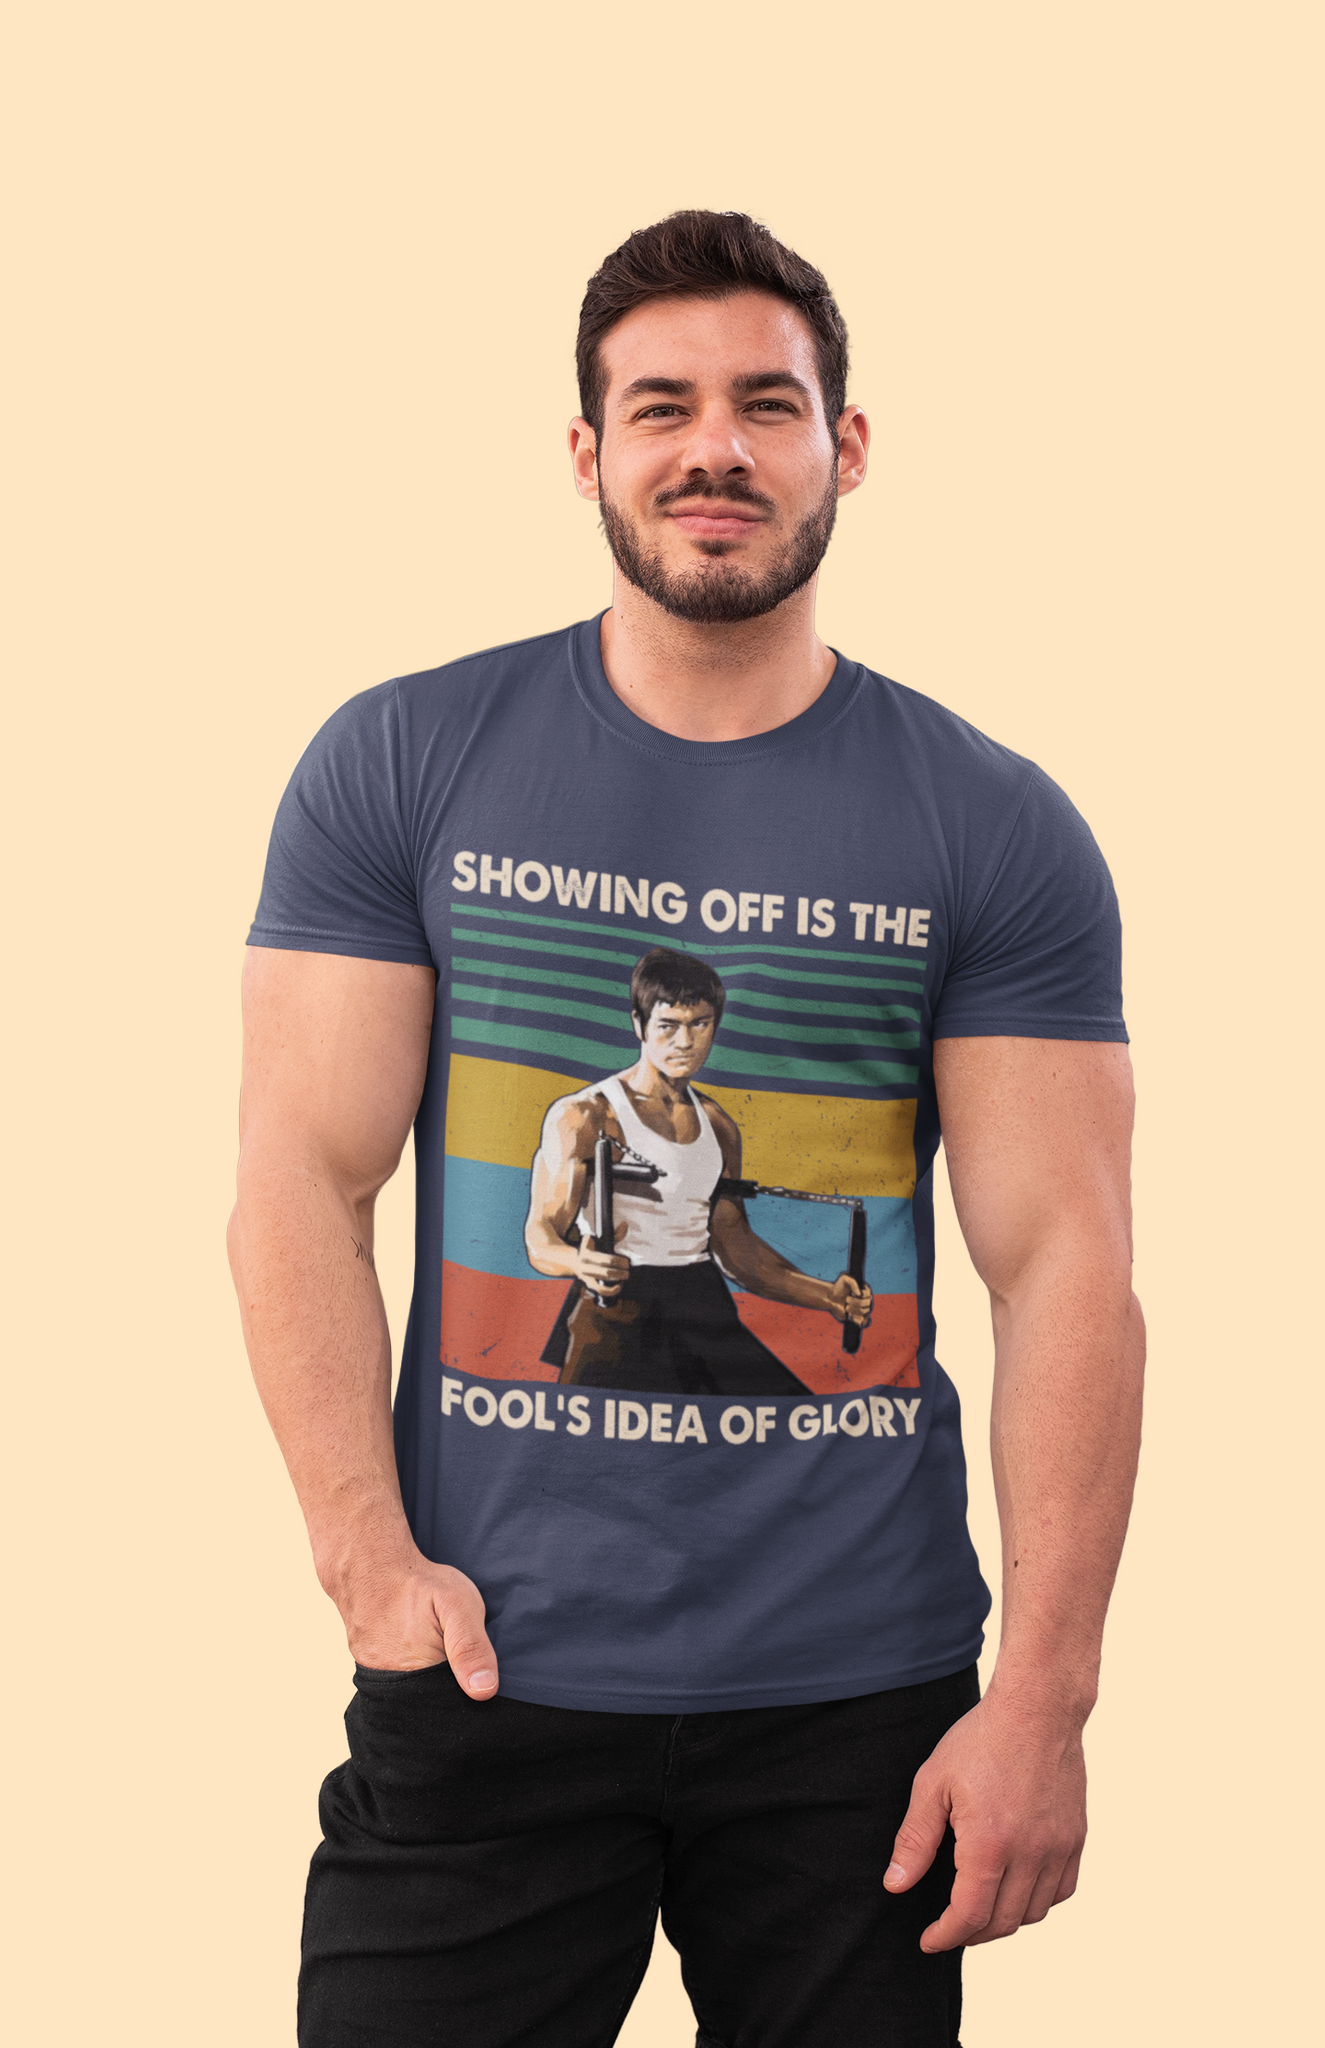 Bruce Lee Vintage T Shirt, Showing Off Is The Fools Idea Of Glory Tshirt